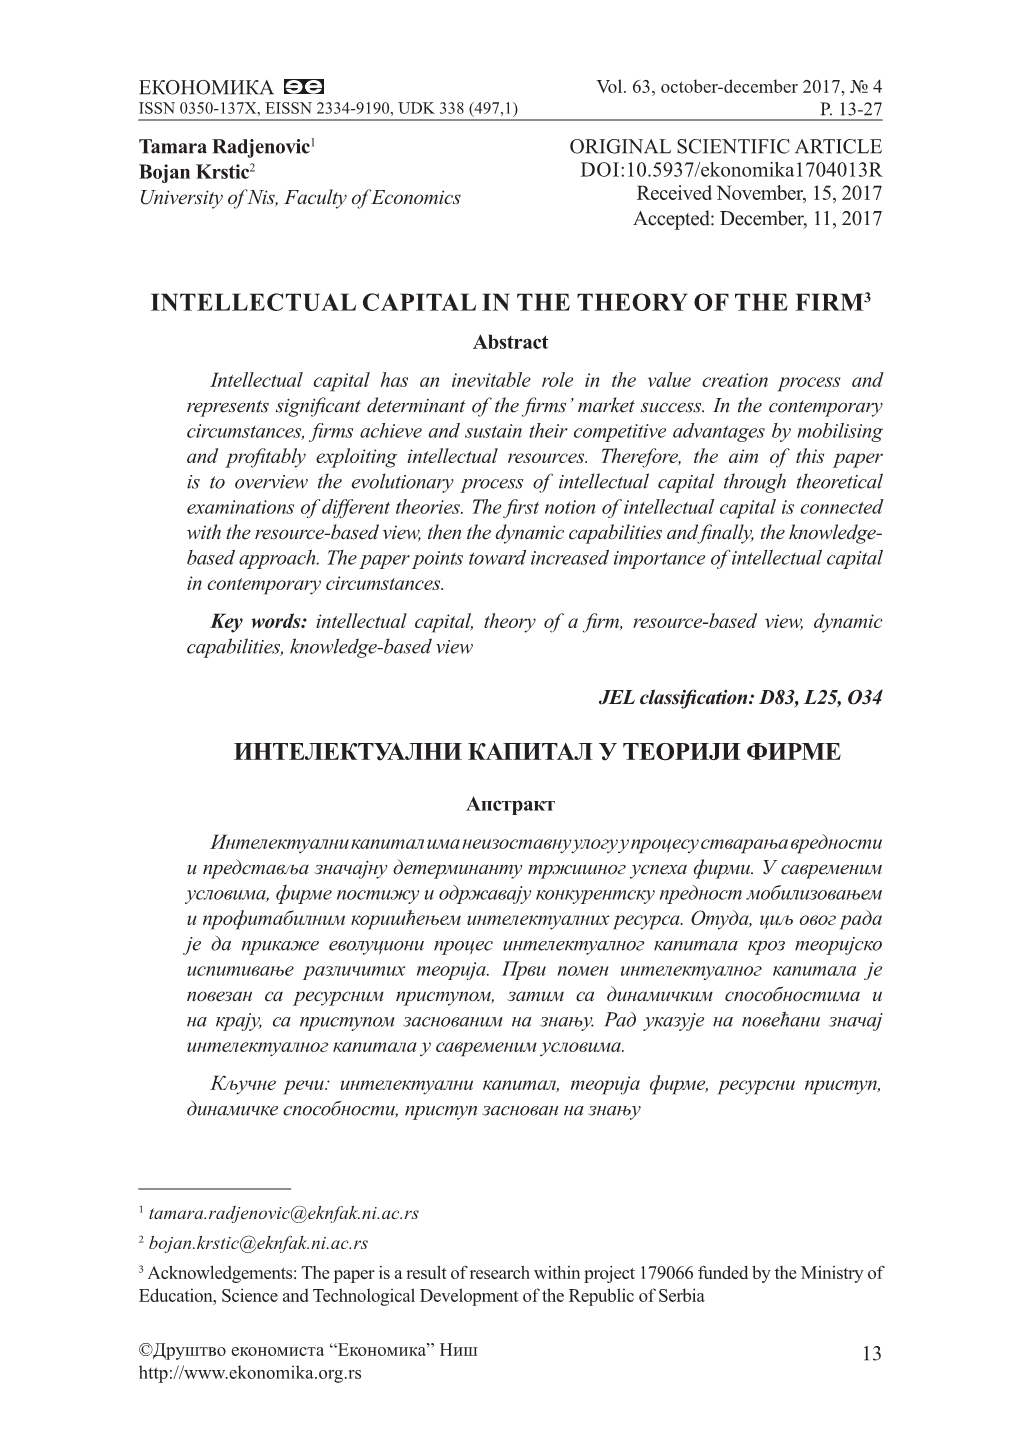 Intellectual Capital in the Theory of the Firm3